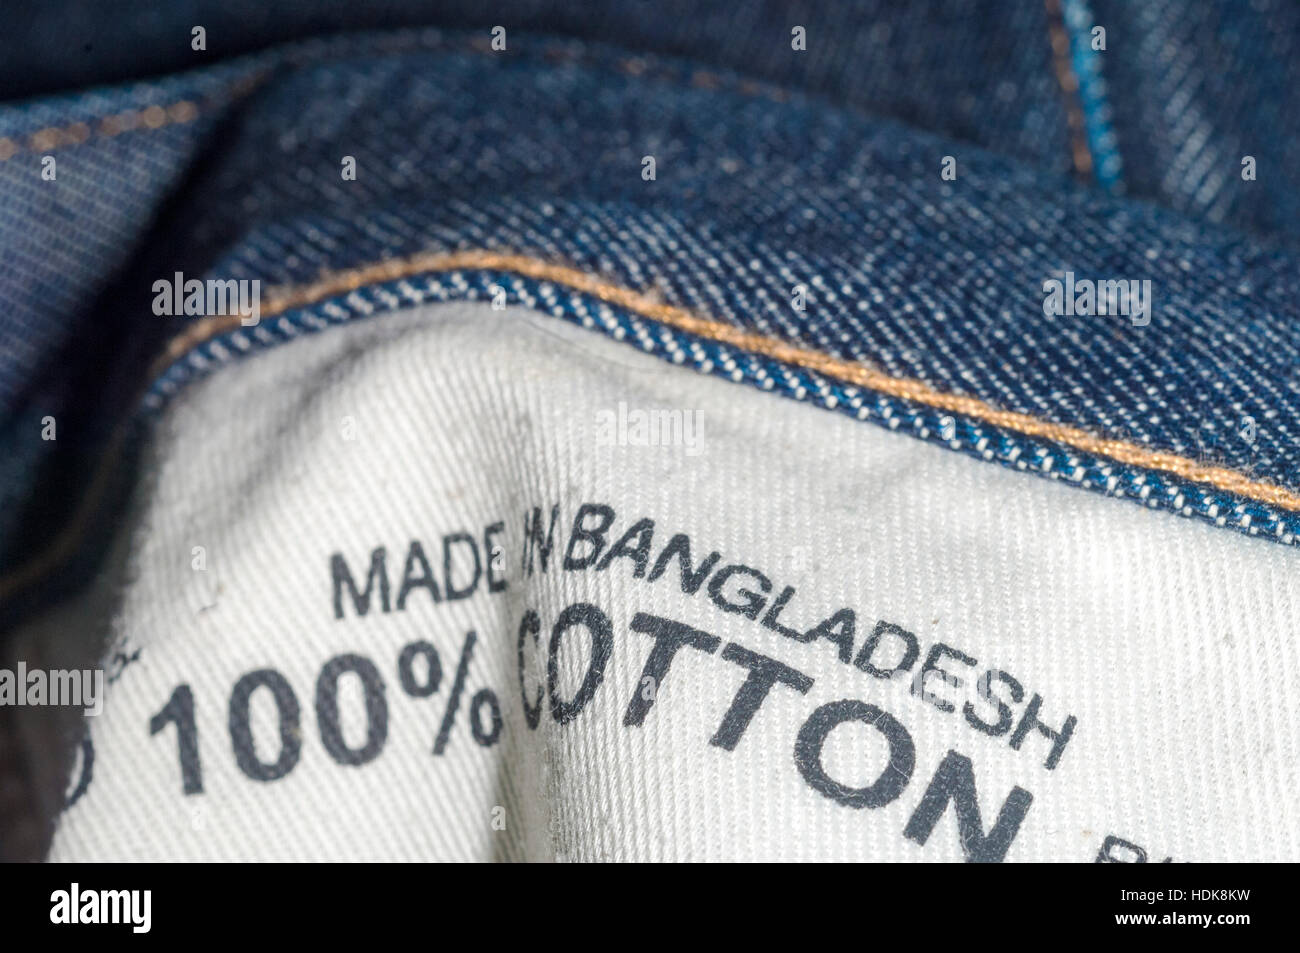 A label on a pair of jeans shows Bangladesh as the country of origin, seen  on Wednesday, December 7, 2016. A report released by the Overseas  Development Institute found that 15 percent